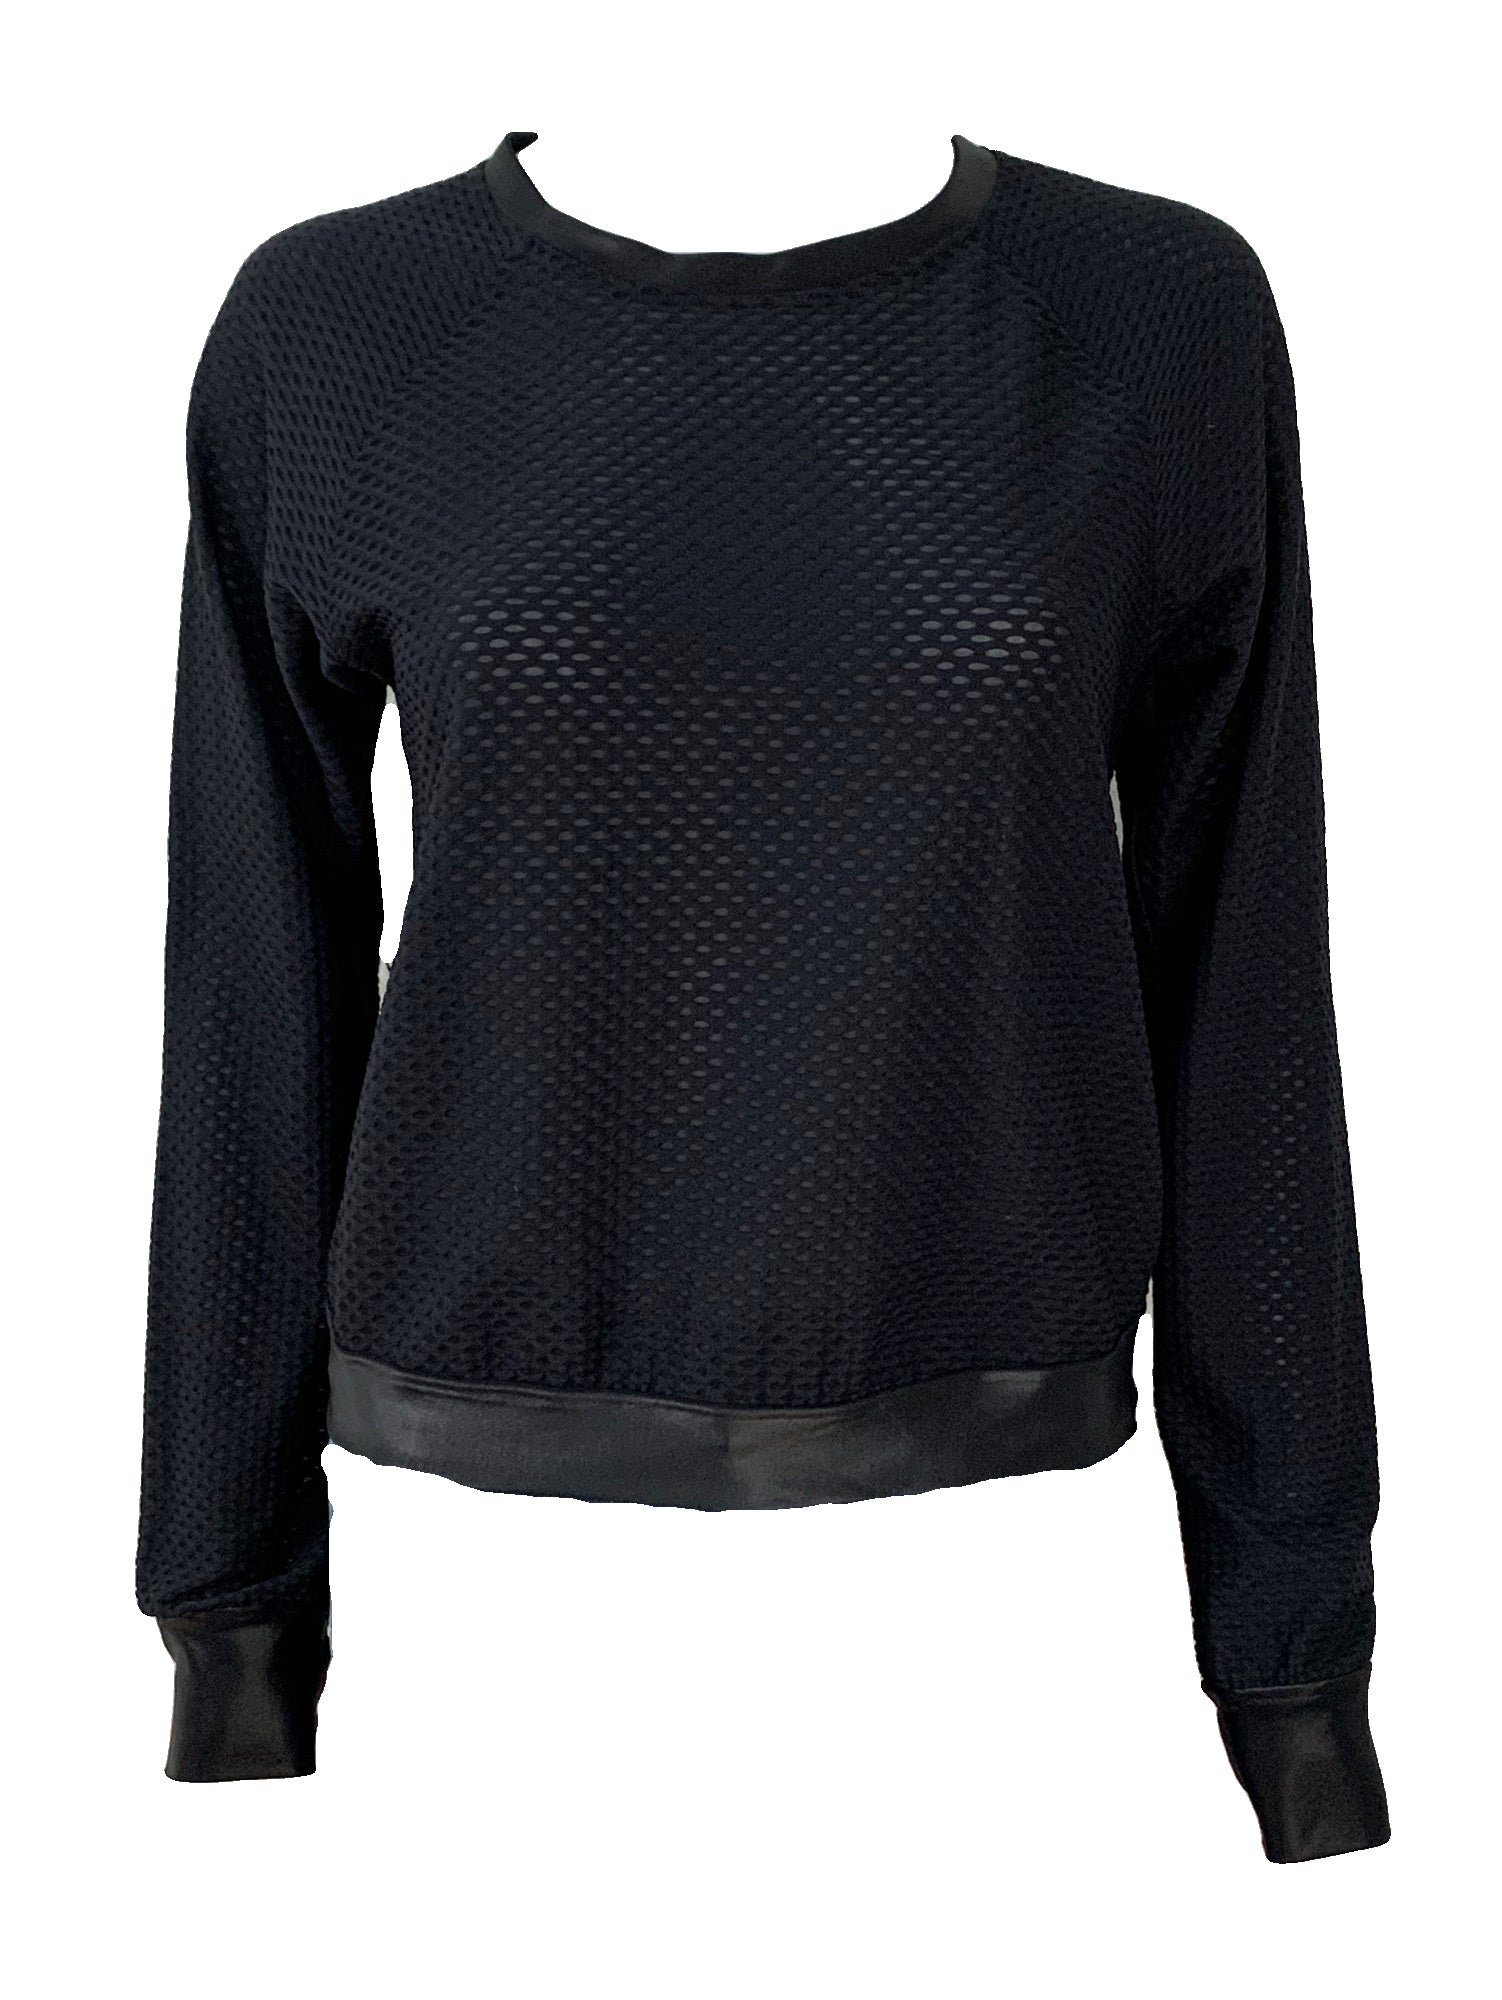 Perforated Long Sleeve Tee Size XS